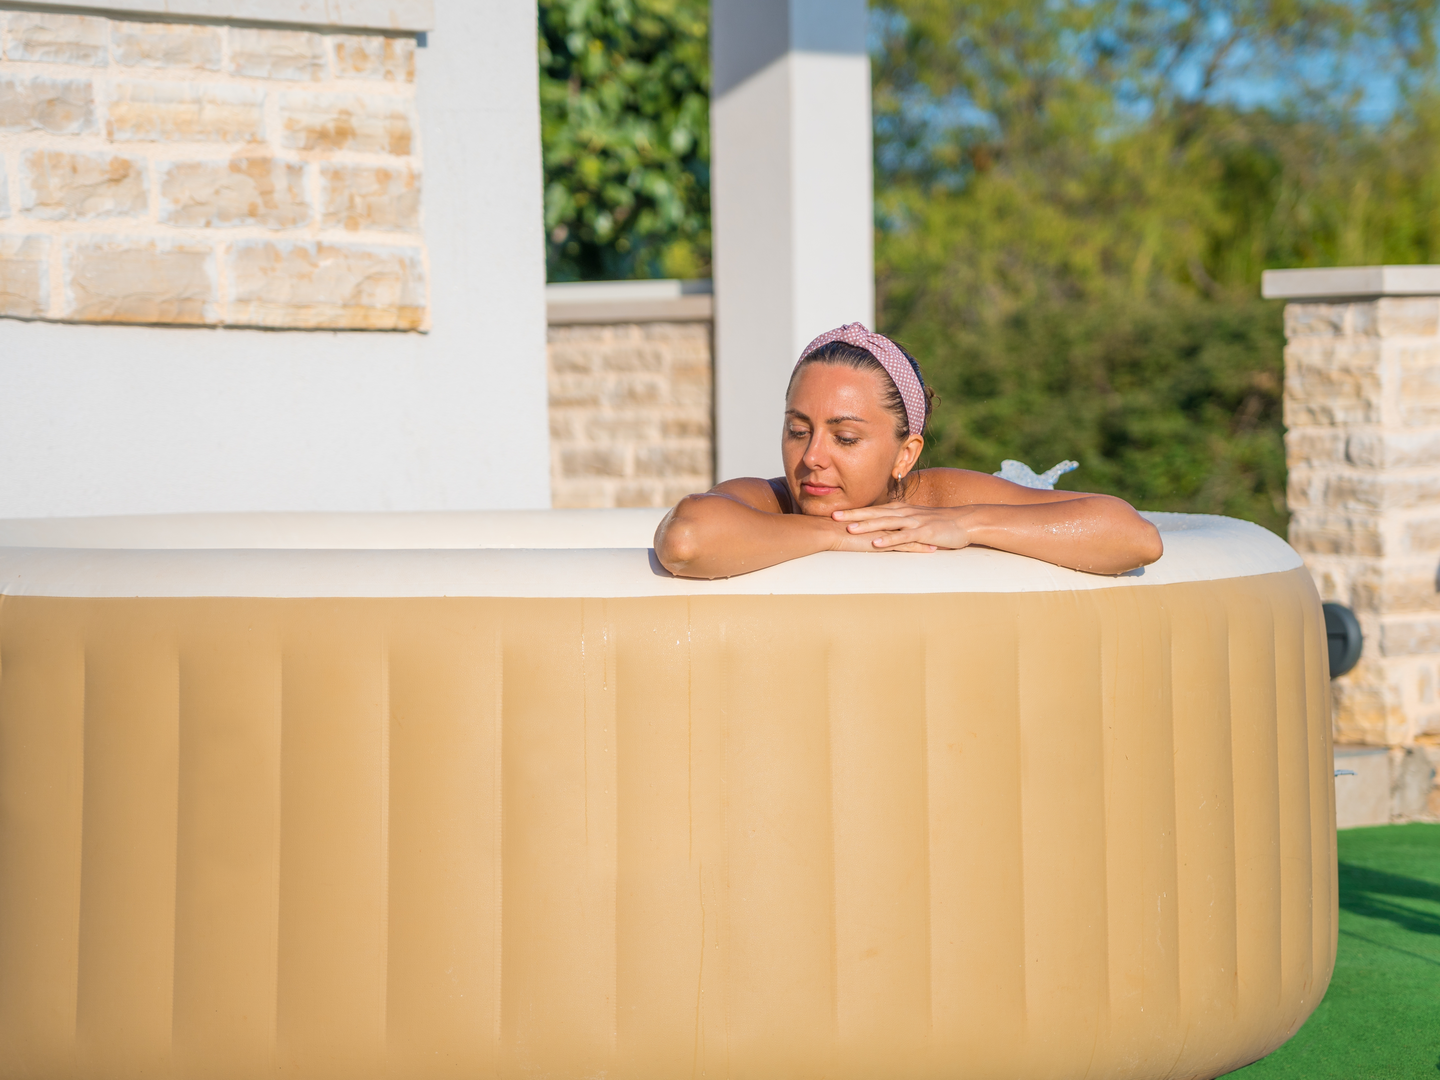 Should I buy an inflatable hot tub? 